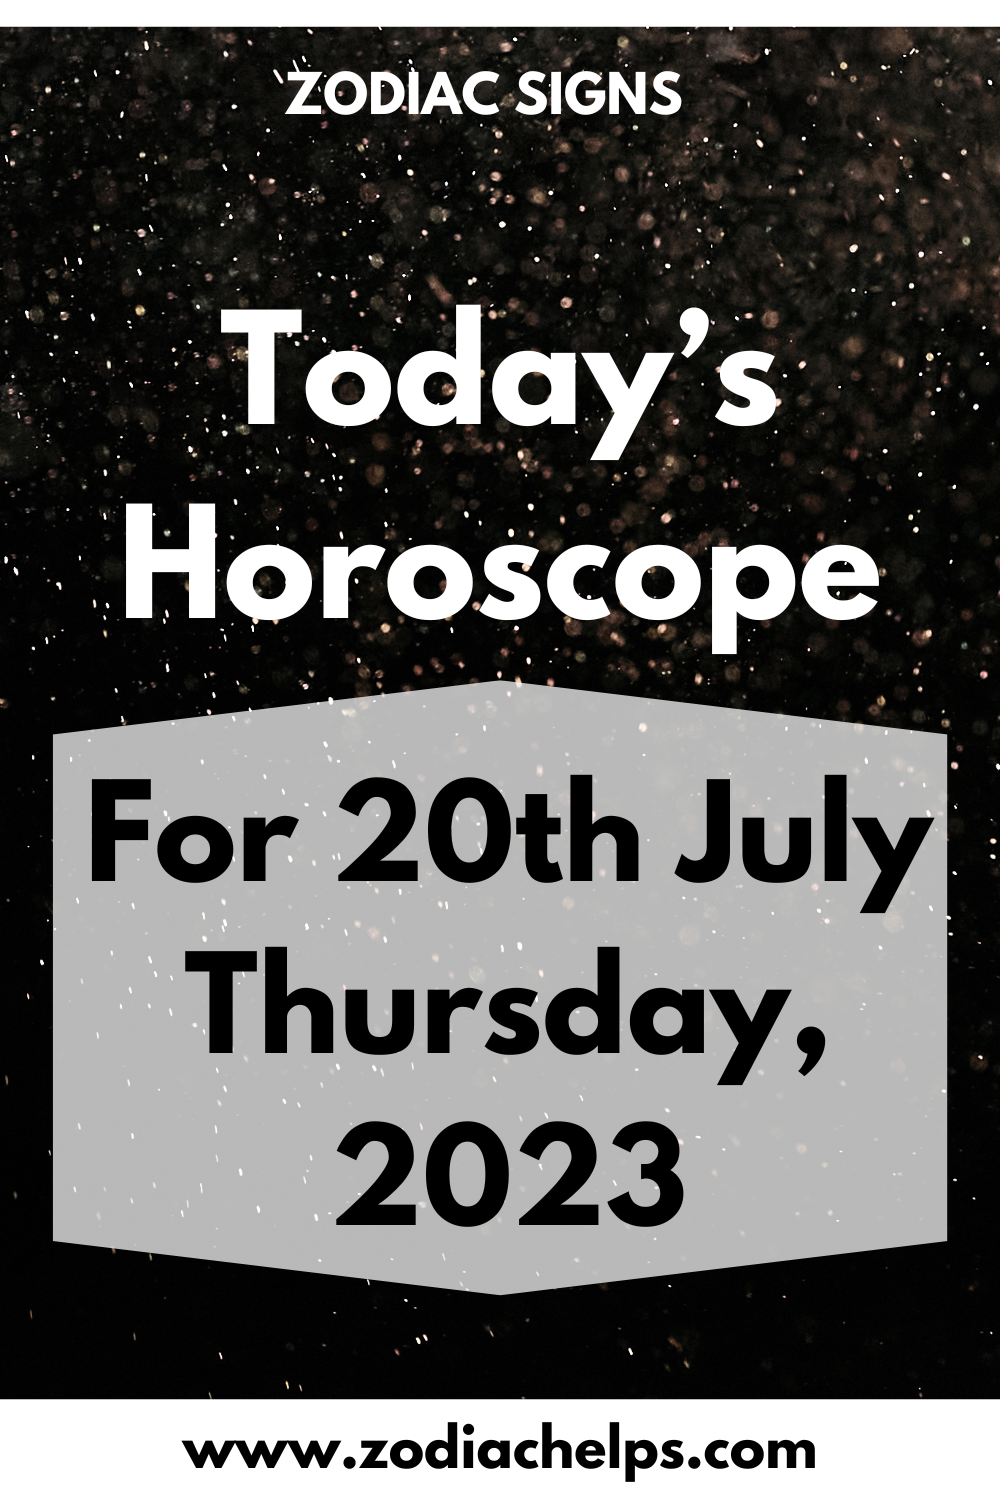 Today’s Horoscope for 20th July Thursday, 2023